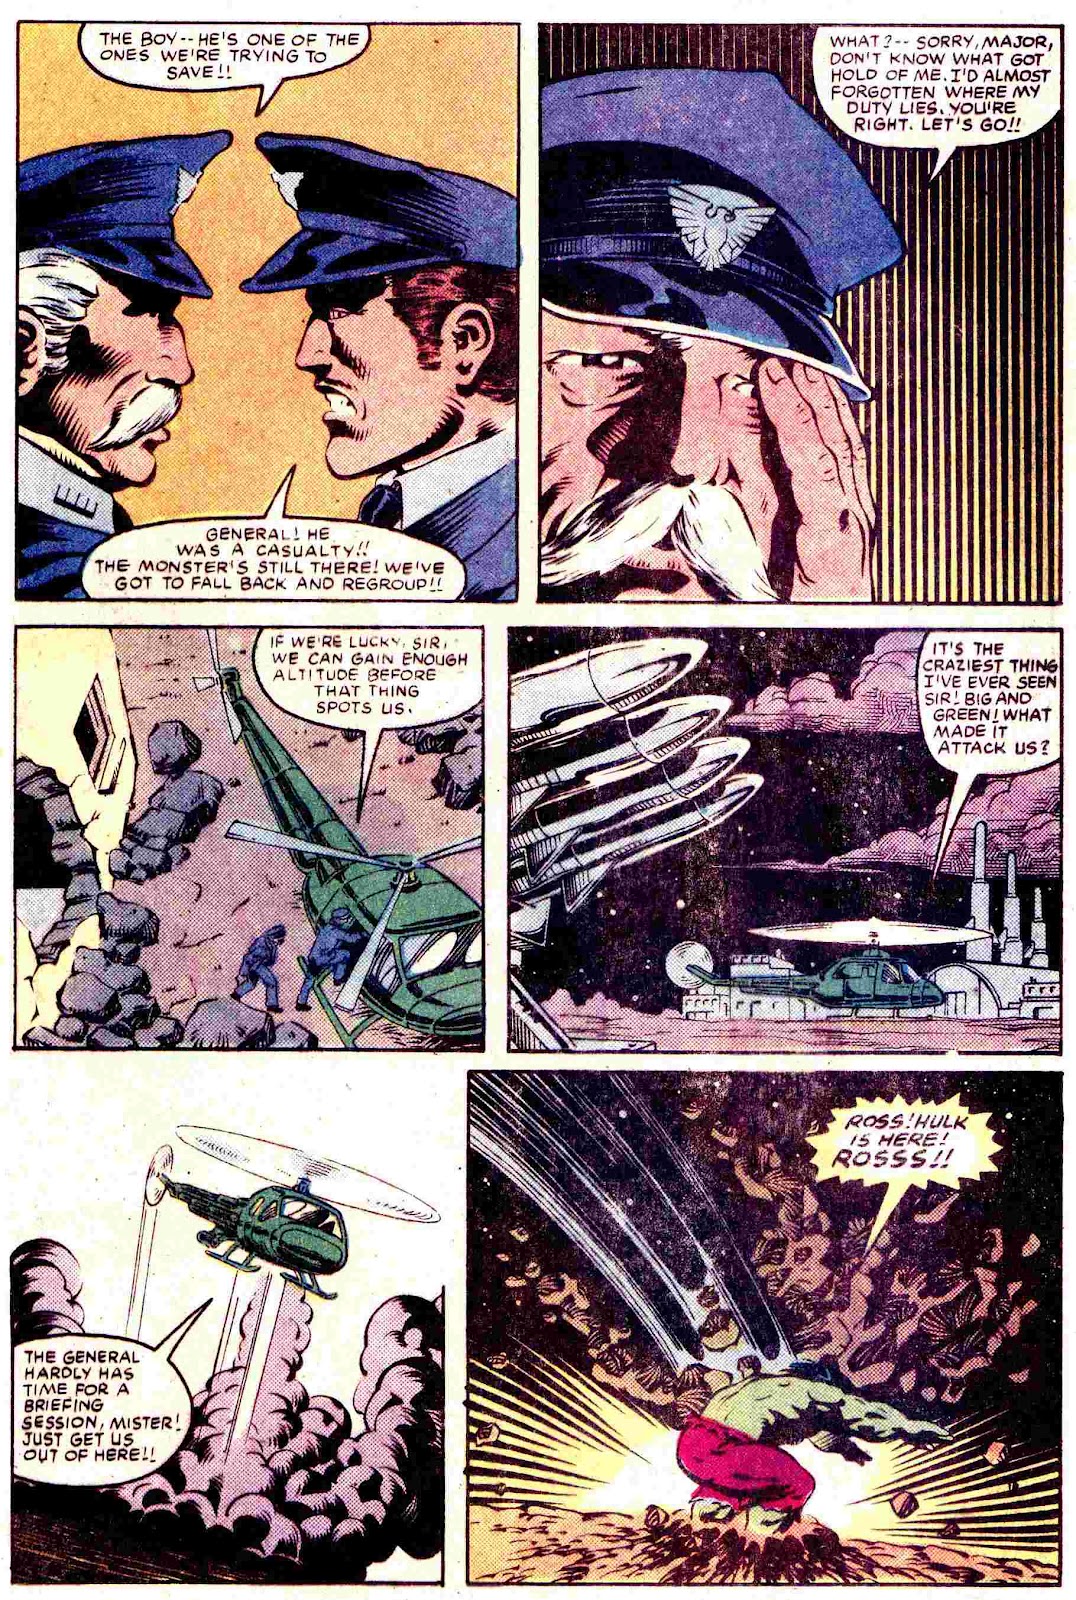 What If? (1977) issue 45 - The Hulk went Berserk - Page 24